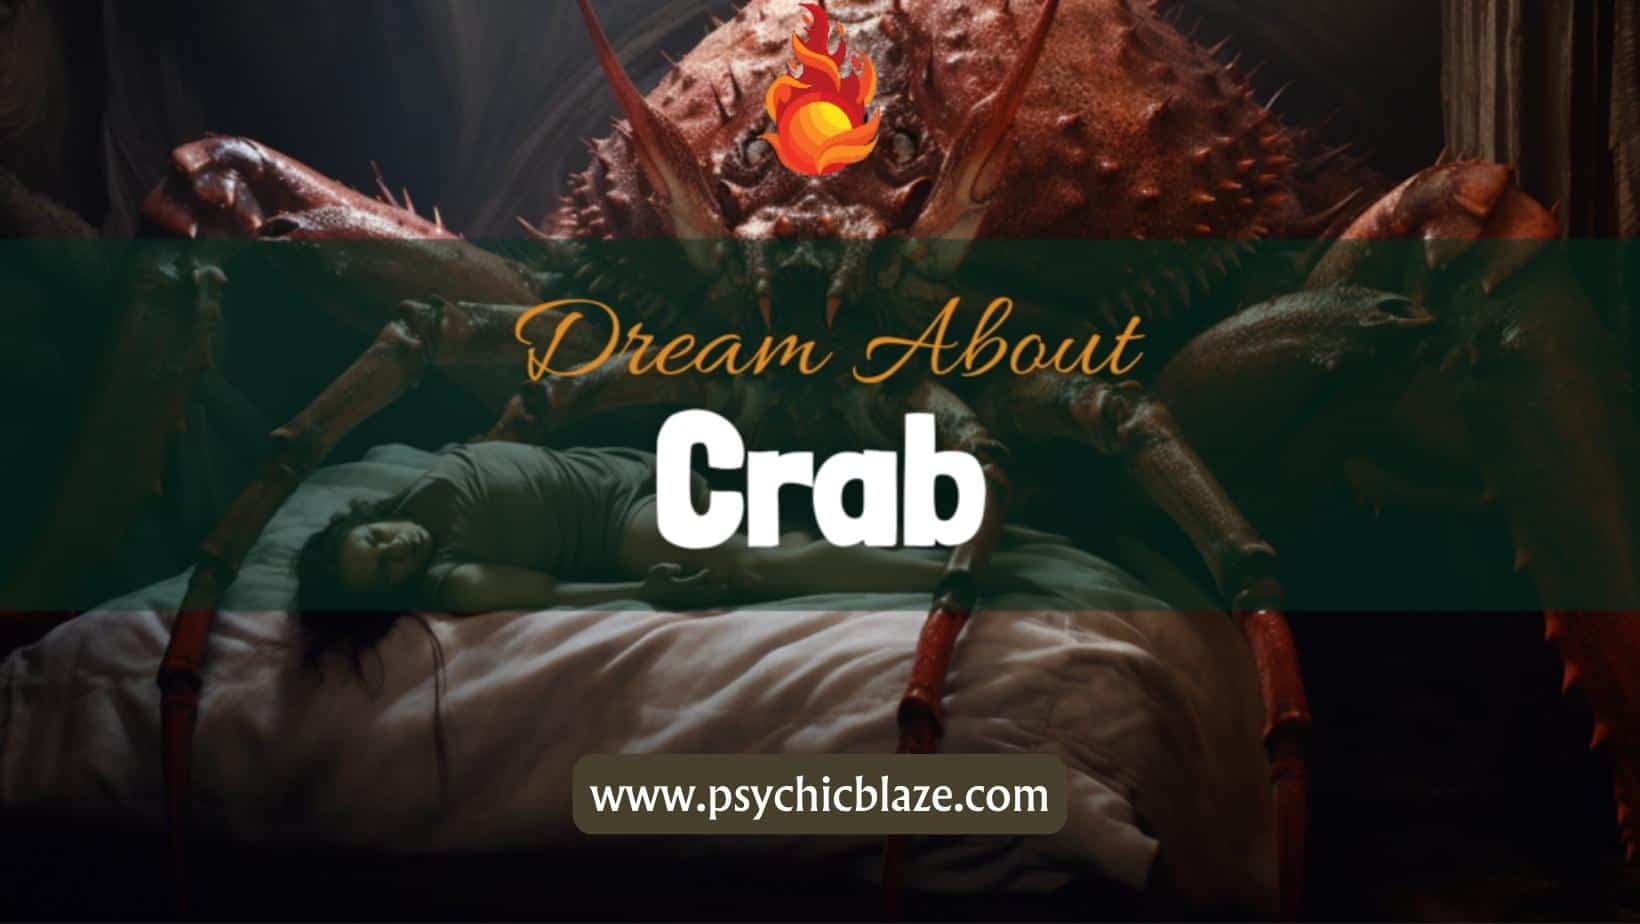 Dream about Crab